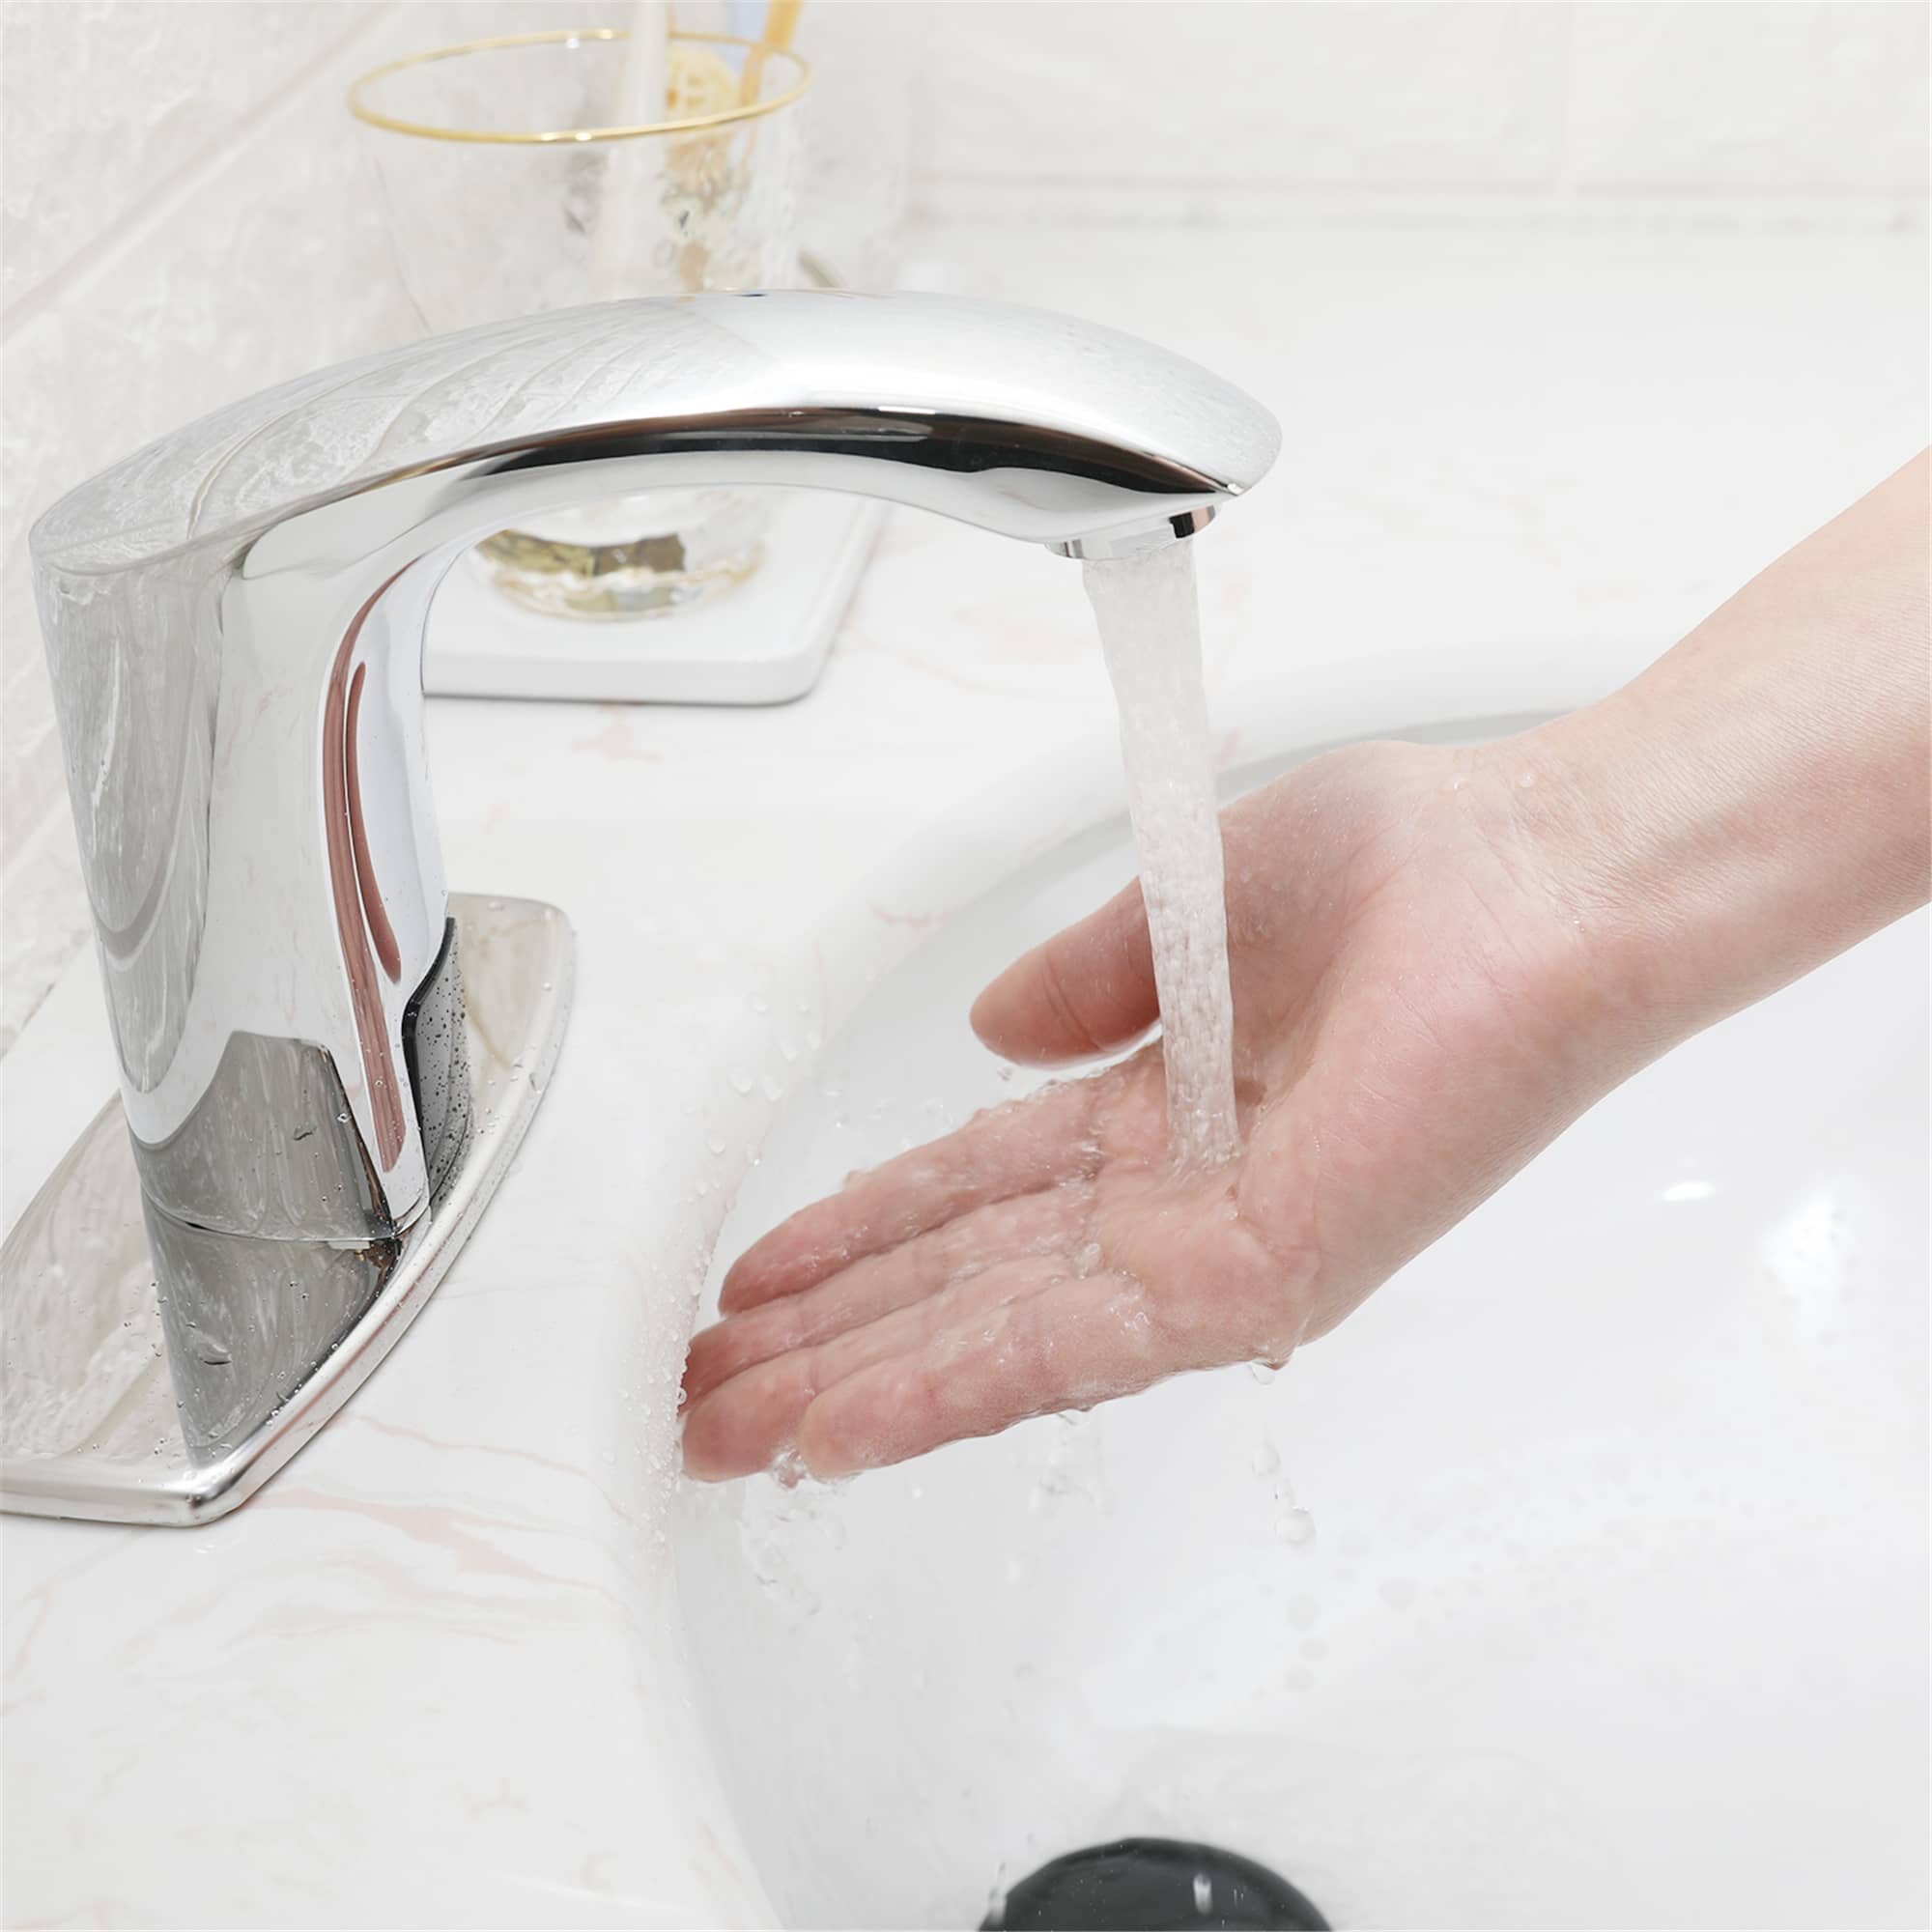 Auto Sensor Touchless Faucet Bathroom Kitchen Basin Sink Cold Water Brass Tap